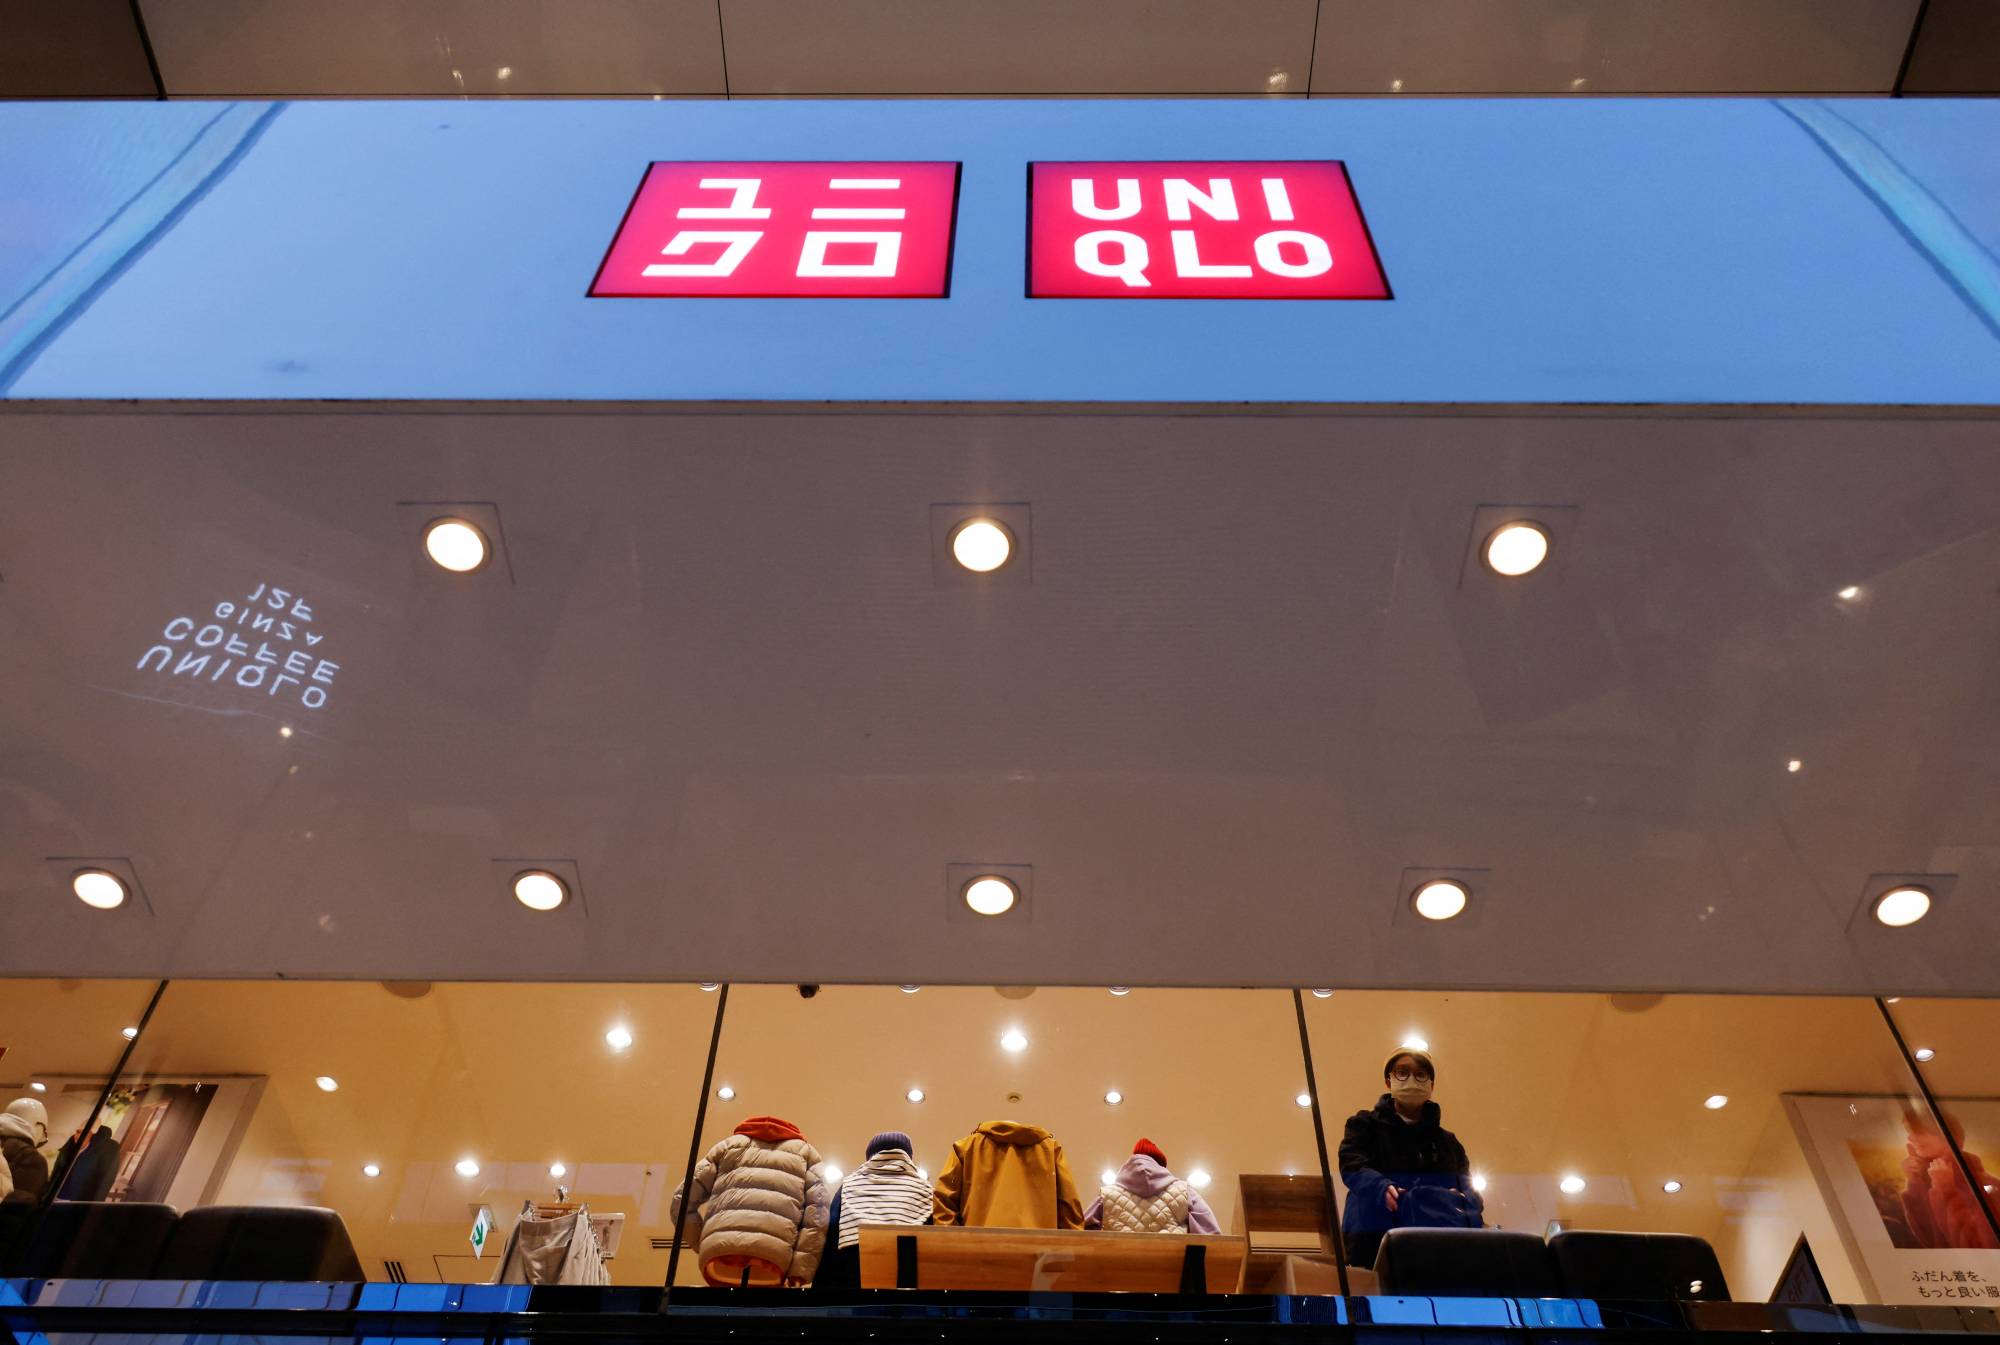 Uniqlo owner sticks to forecast while seeking to raise wages - The